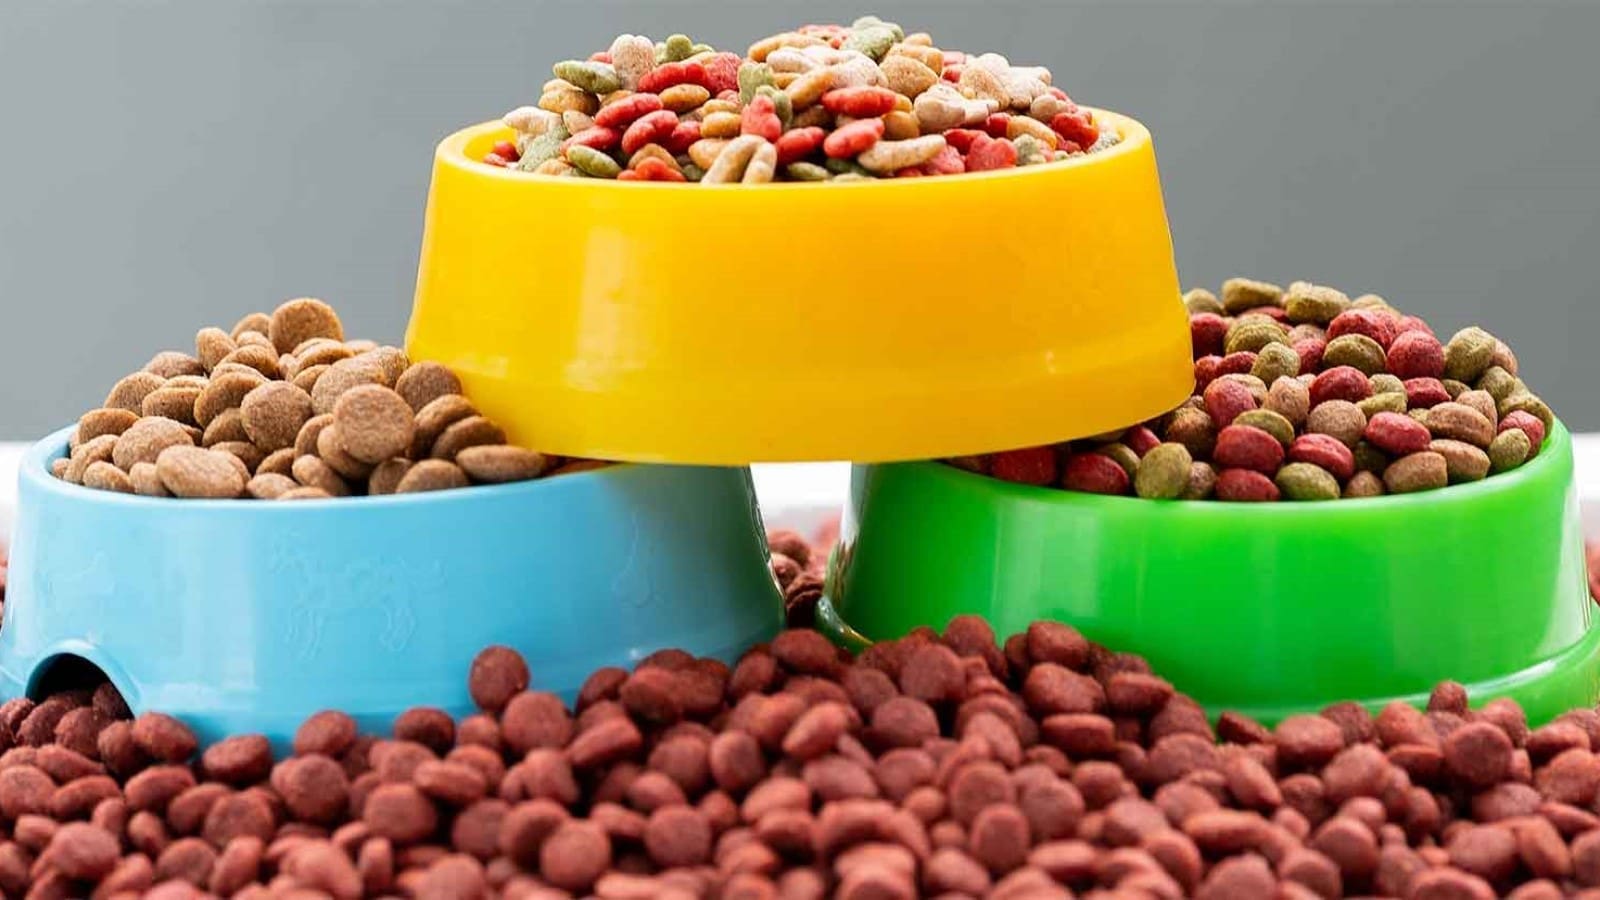 United Petfood expands presence with acquisition of Vital Petfood Group in Denmark